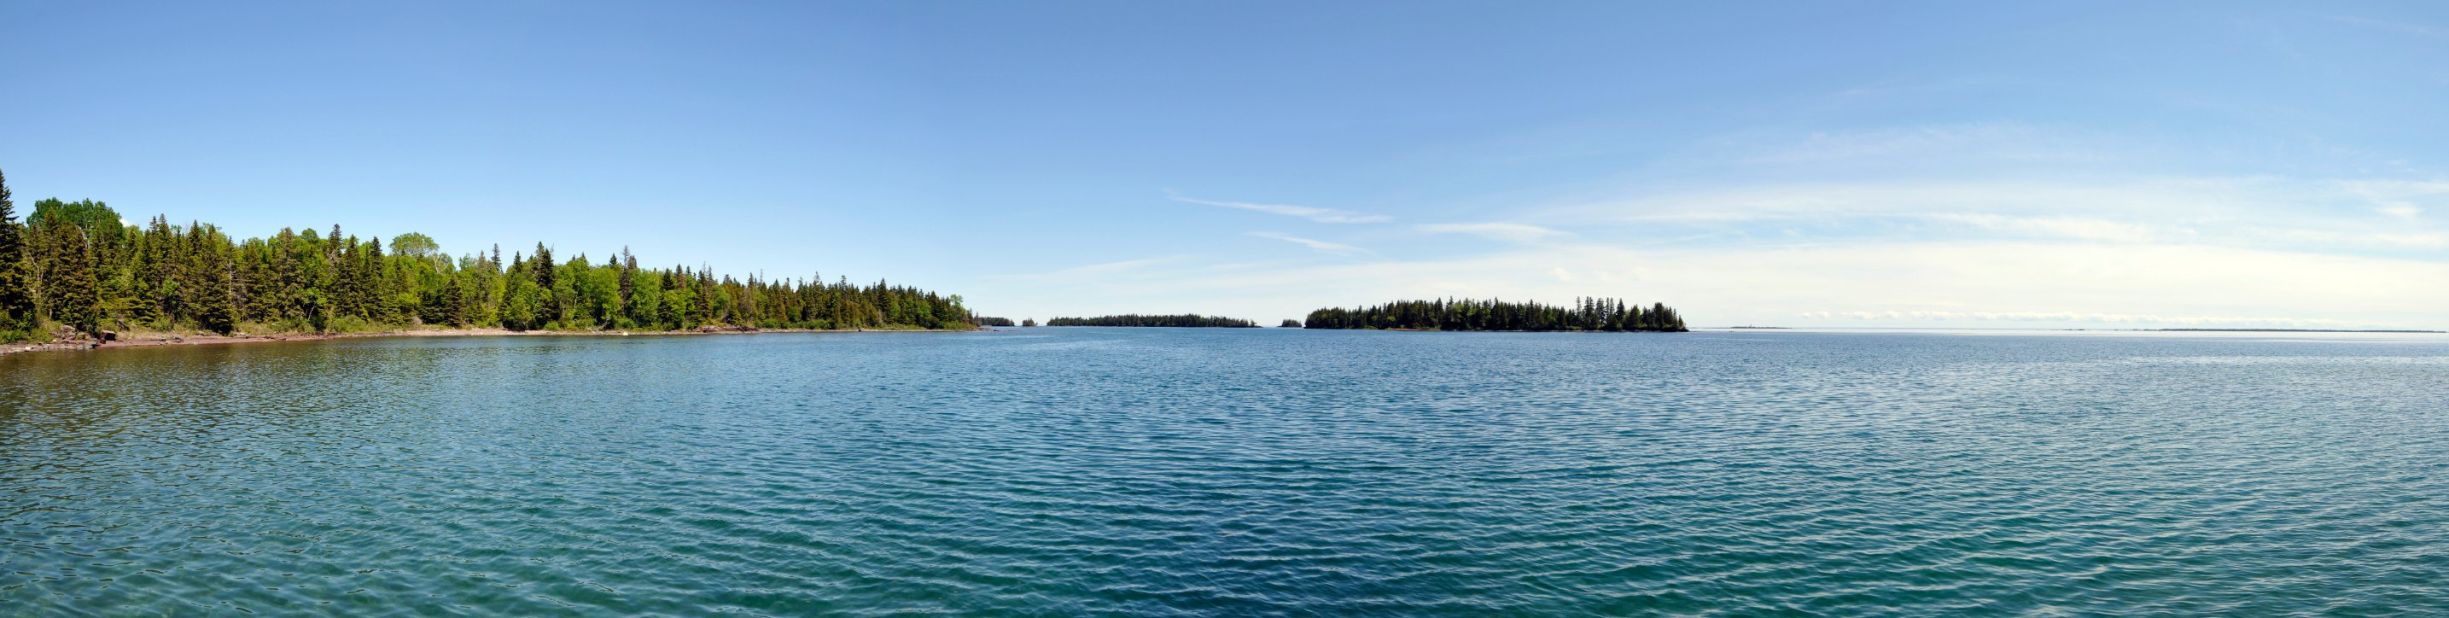 Some visitors stay for days or even weeks at a time, giving them the chance to explore sights such as Malone Bay. There's only one nine-mile trail that takes visitors there and back, but it's worth the journey for the gorgeous views of Siskiwit Lake, Isle Royale's largest lake, park ranger Lucas Westcott said. 